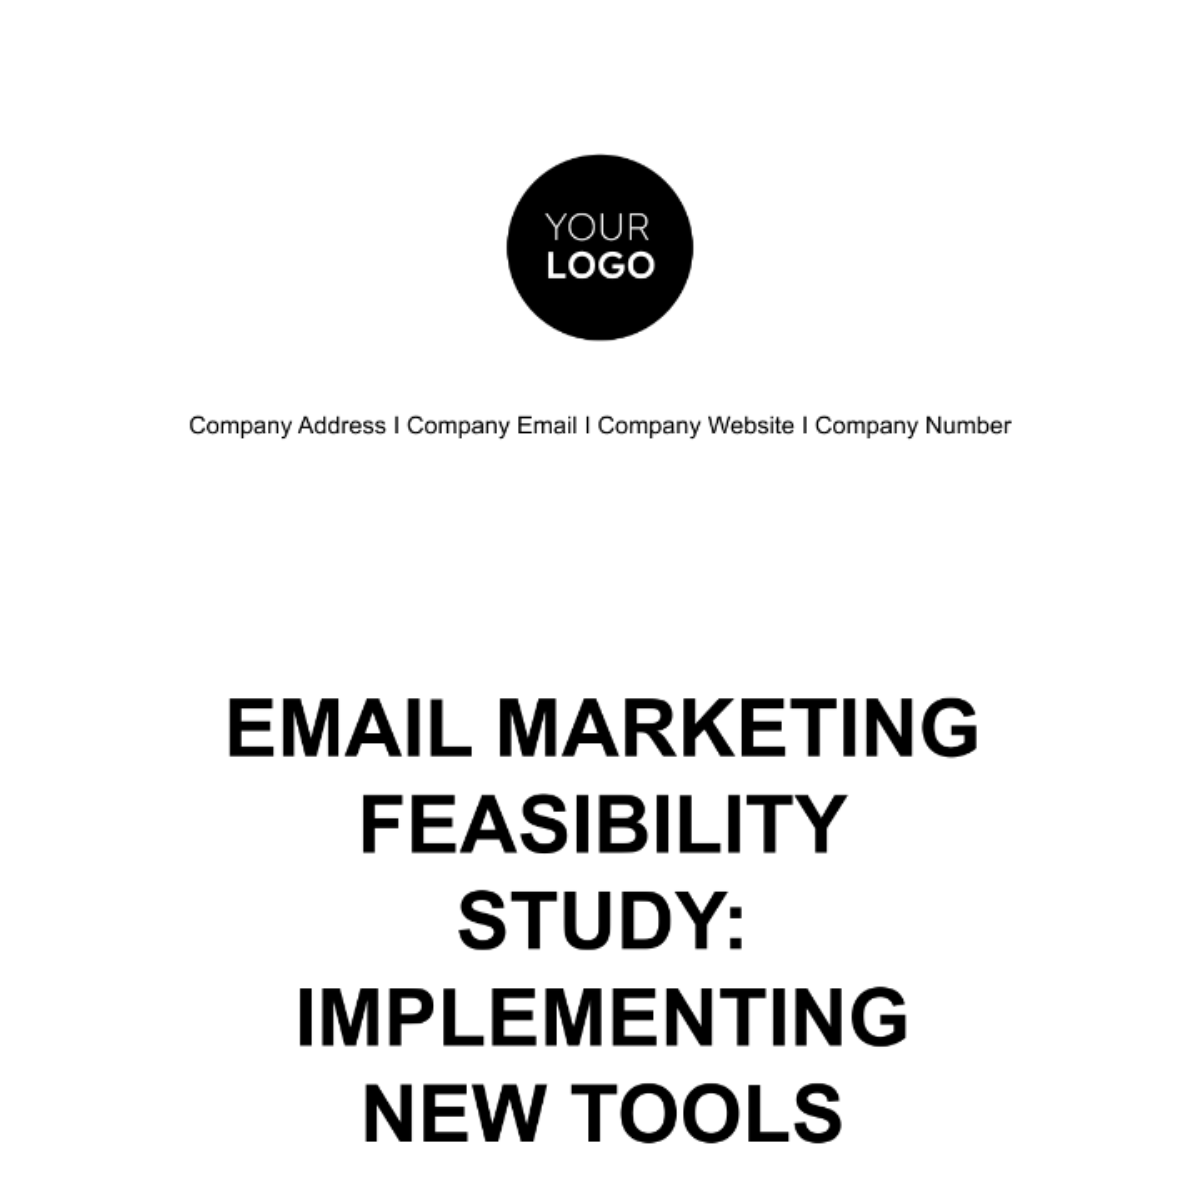 Free Email Marketing Feasibility Study: Implementing New Tools Template